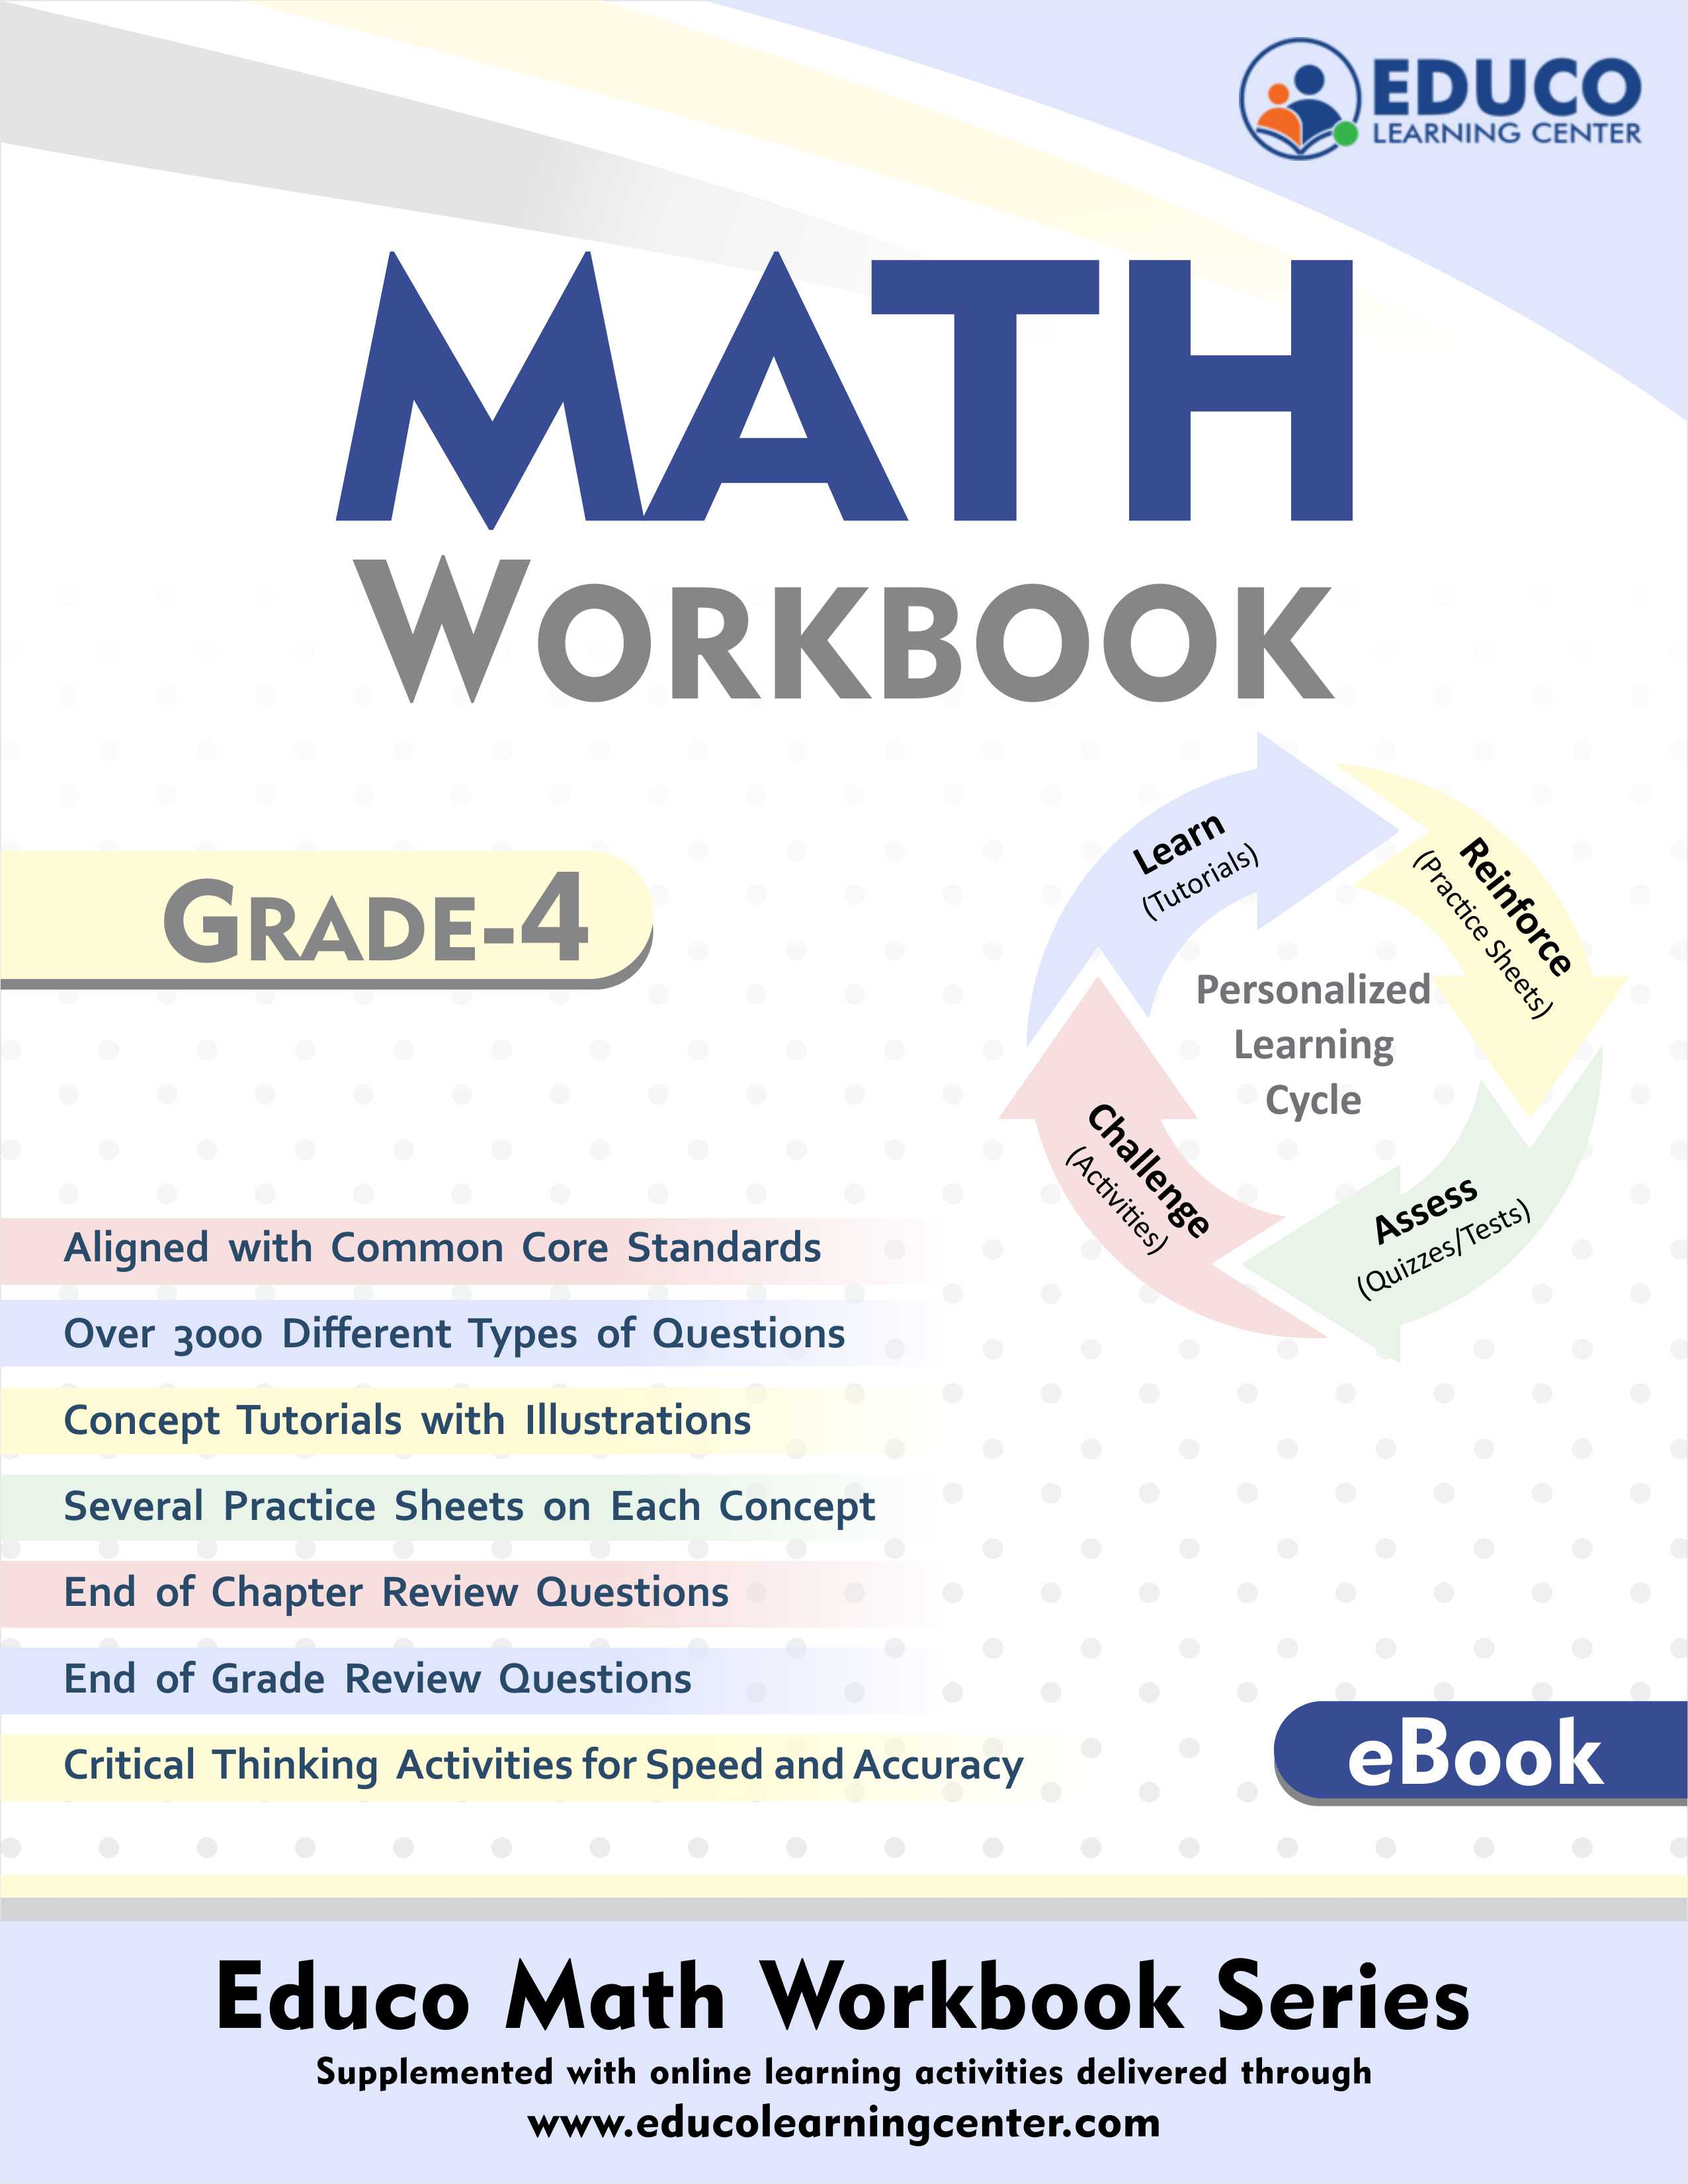 Grade 4 Math Printable Workbook including over 3000 Different types of Math Questions